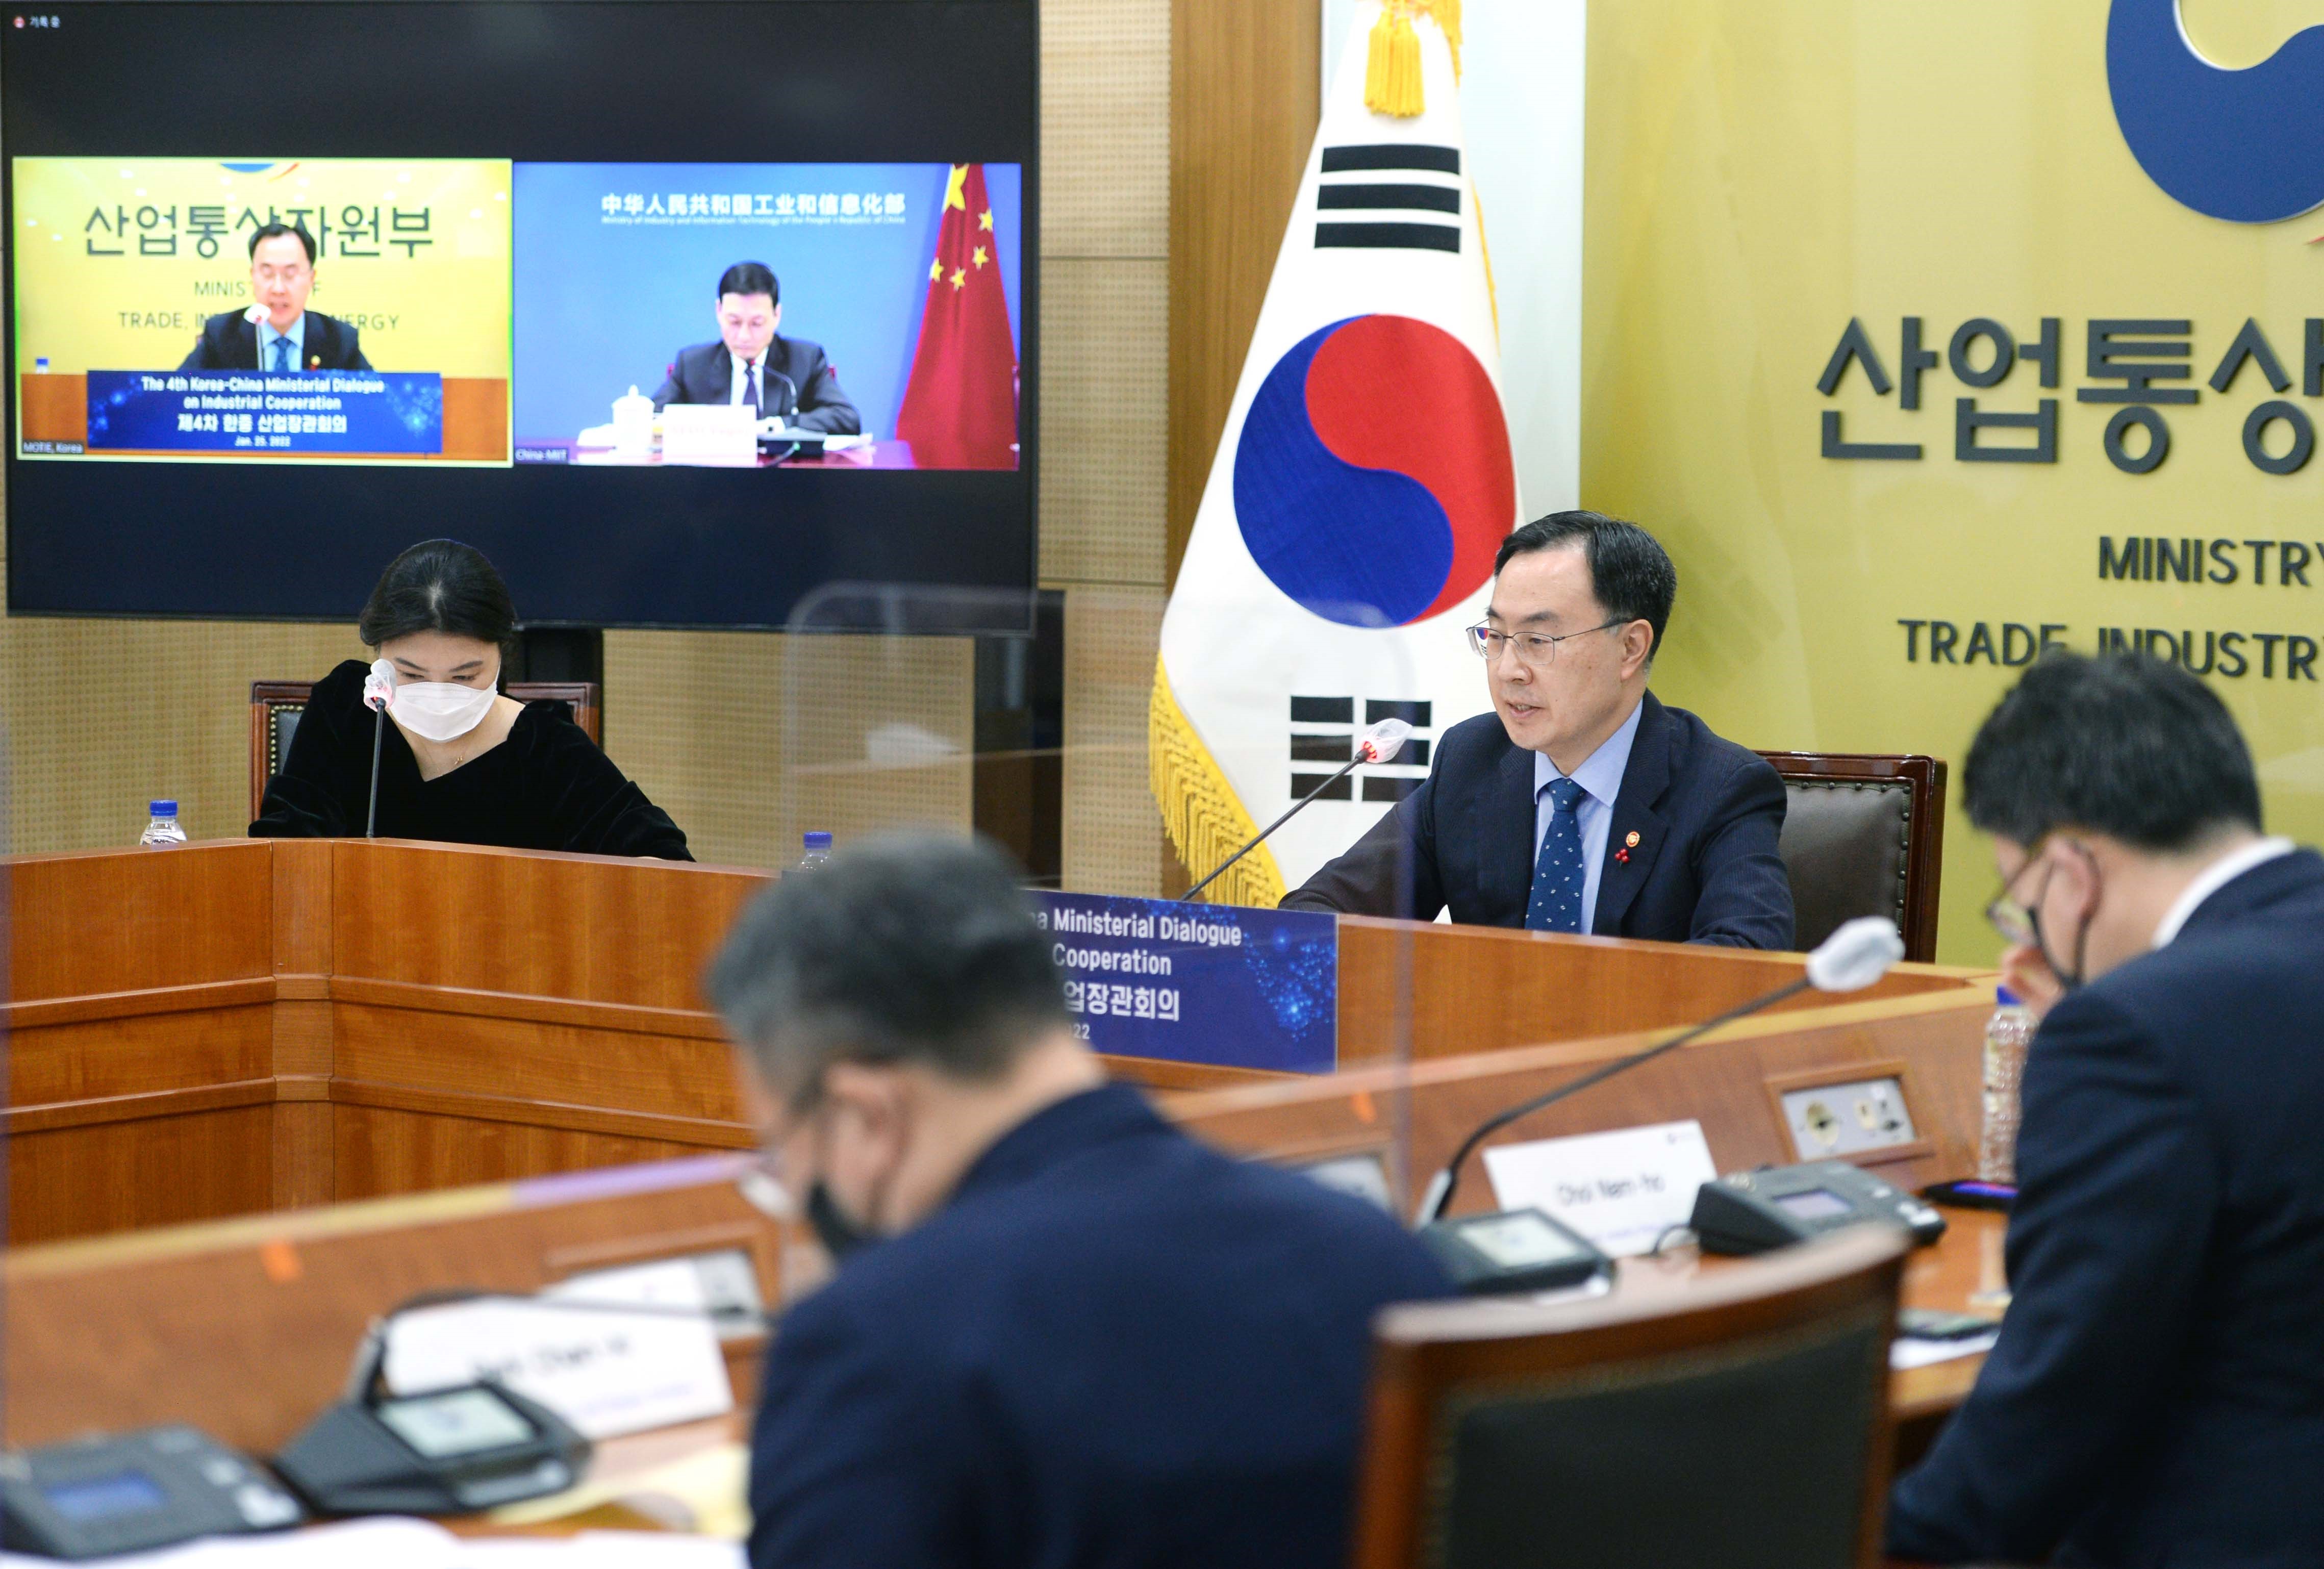 The 4th Korea-China Ministerial Dialogue on Industrial Cooperation